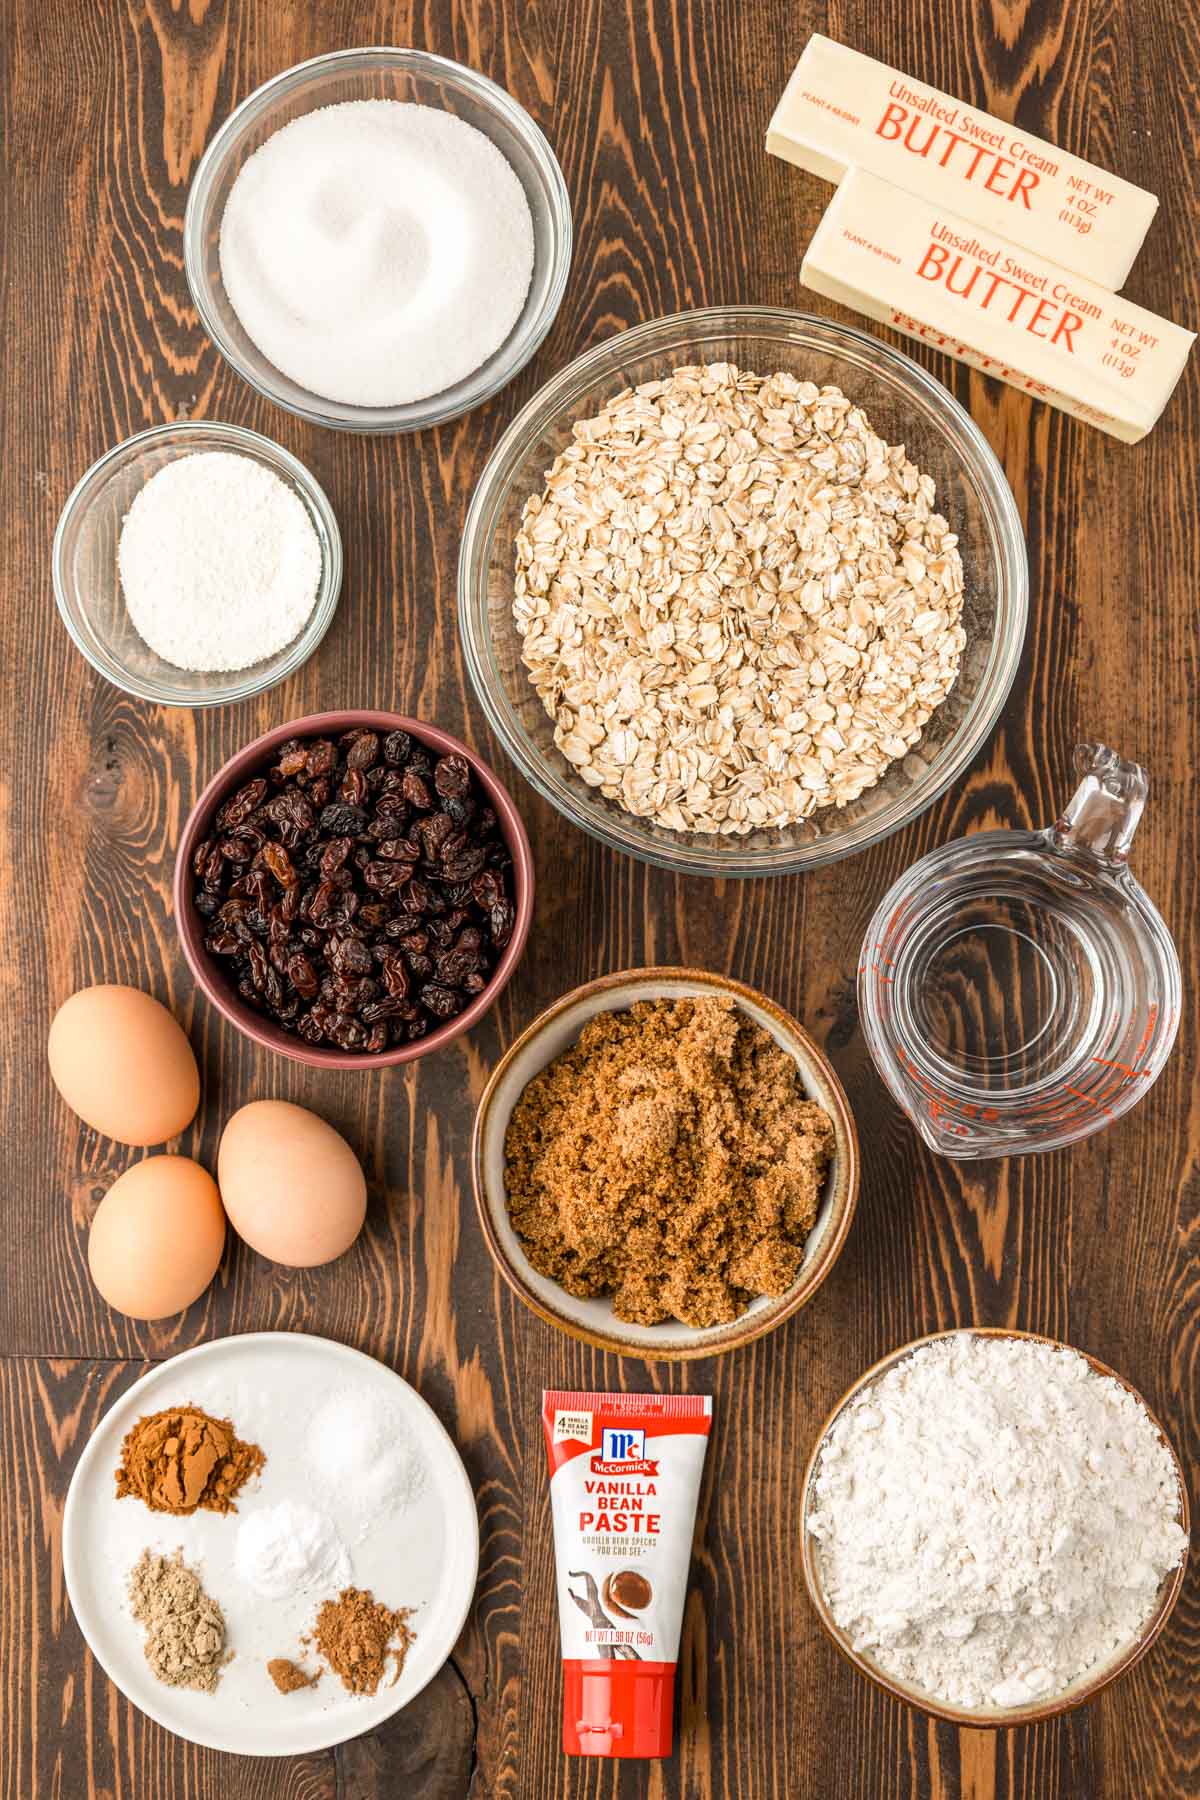 Ingredients to make oatmeal raisin cookies on a wooden table.